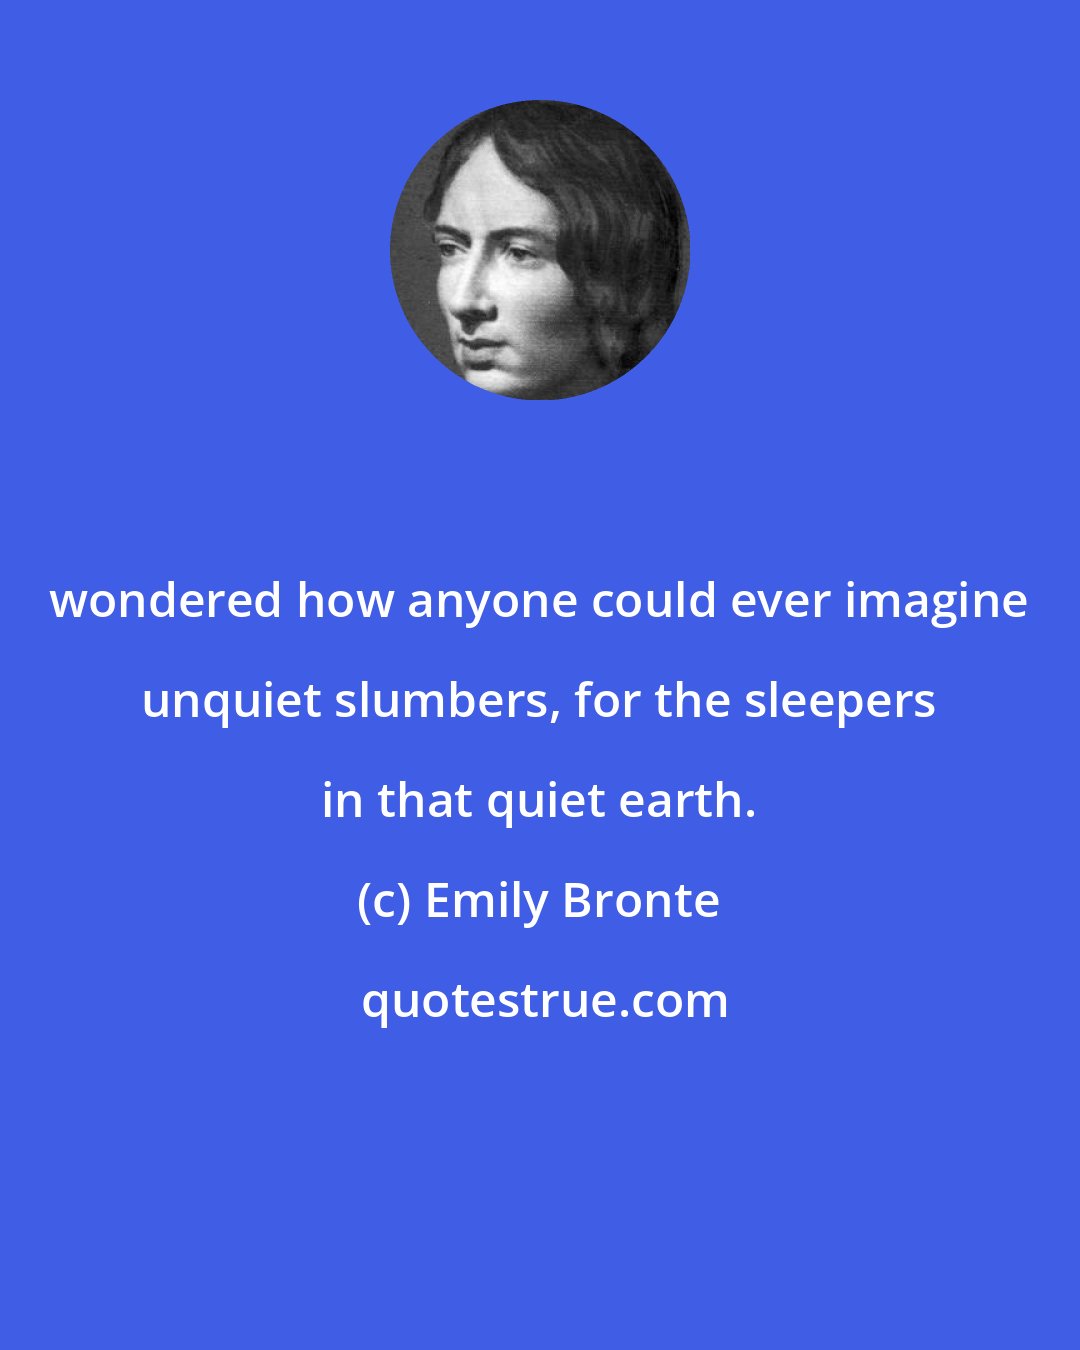 Emily Bronte: wondered how anyone could ever imagine unquiet slumbers, for the sleepers in that quiet earth.